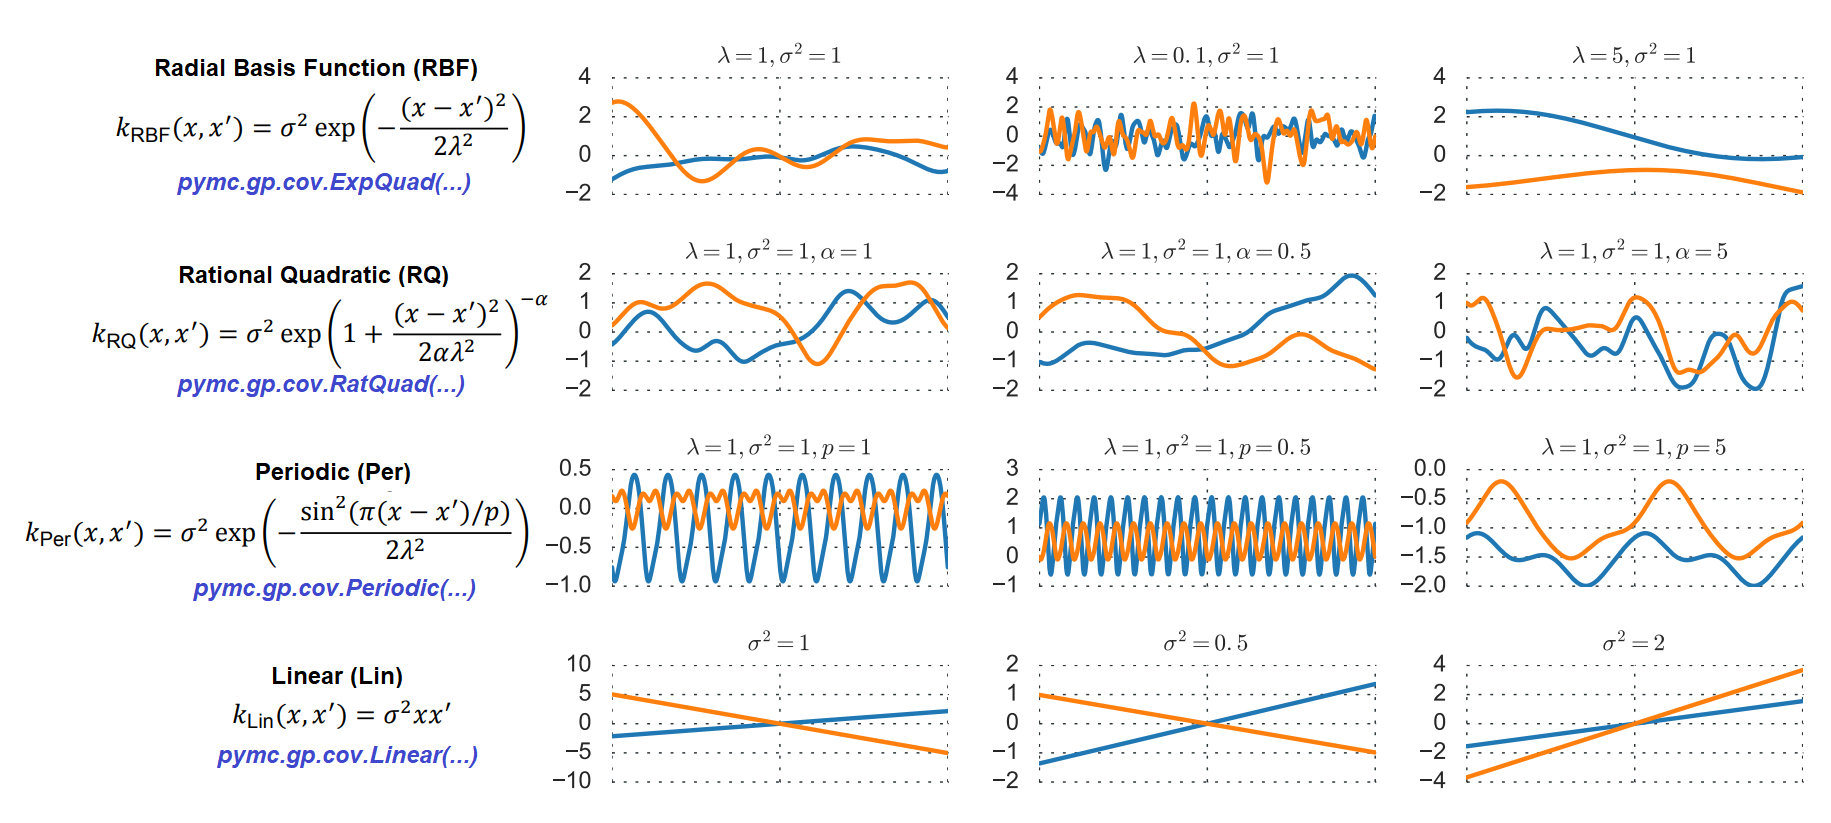 Covariance functions